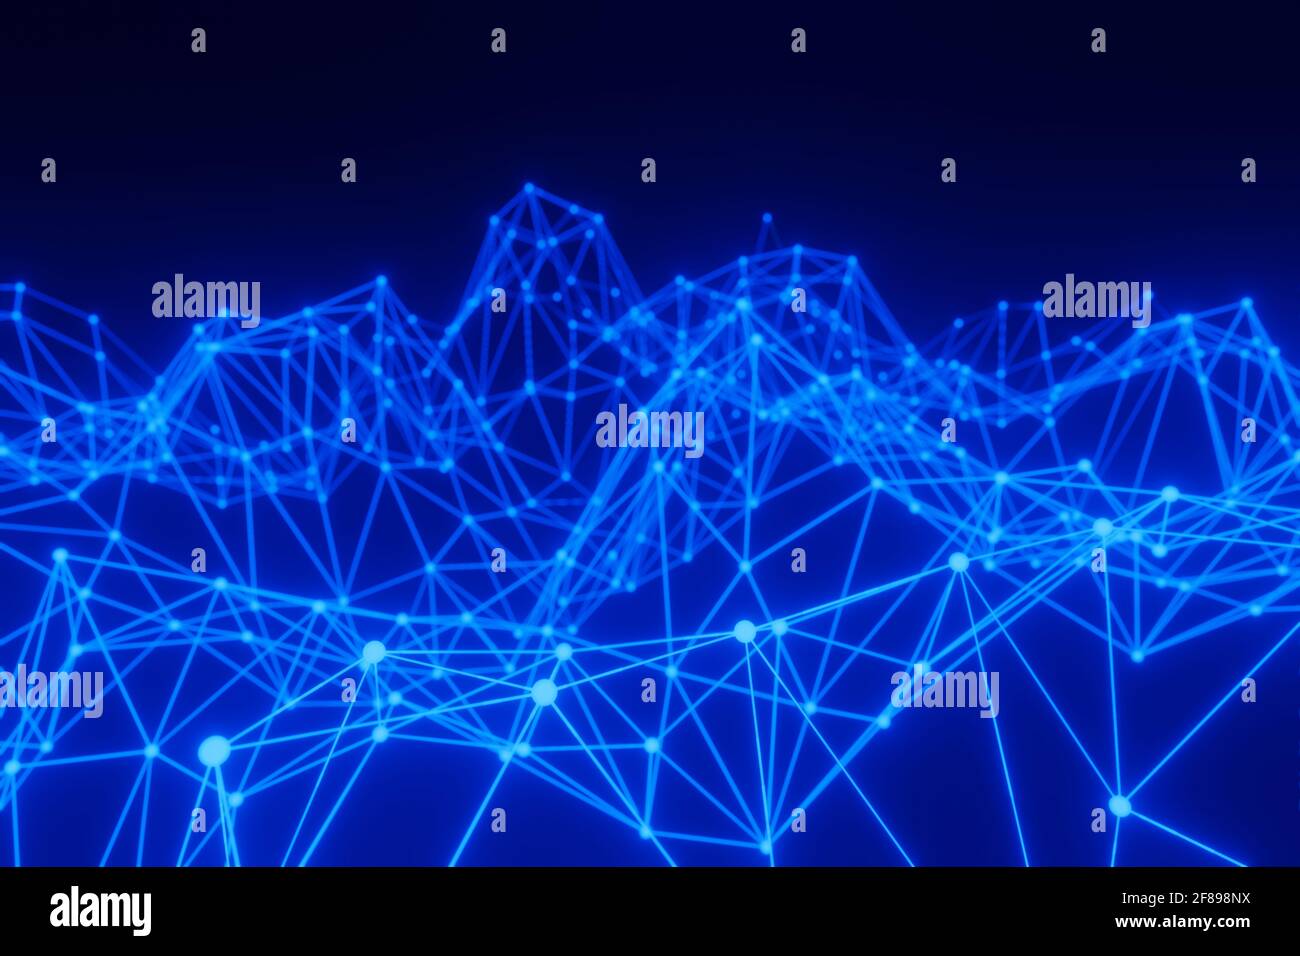 Glowing Blue Abstract Triangle Plexus on Black Background Stock Photo